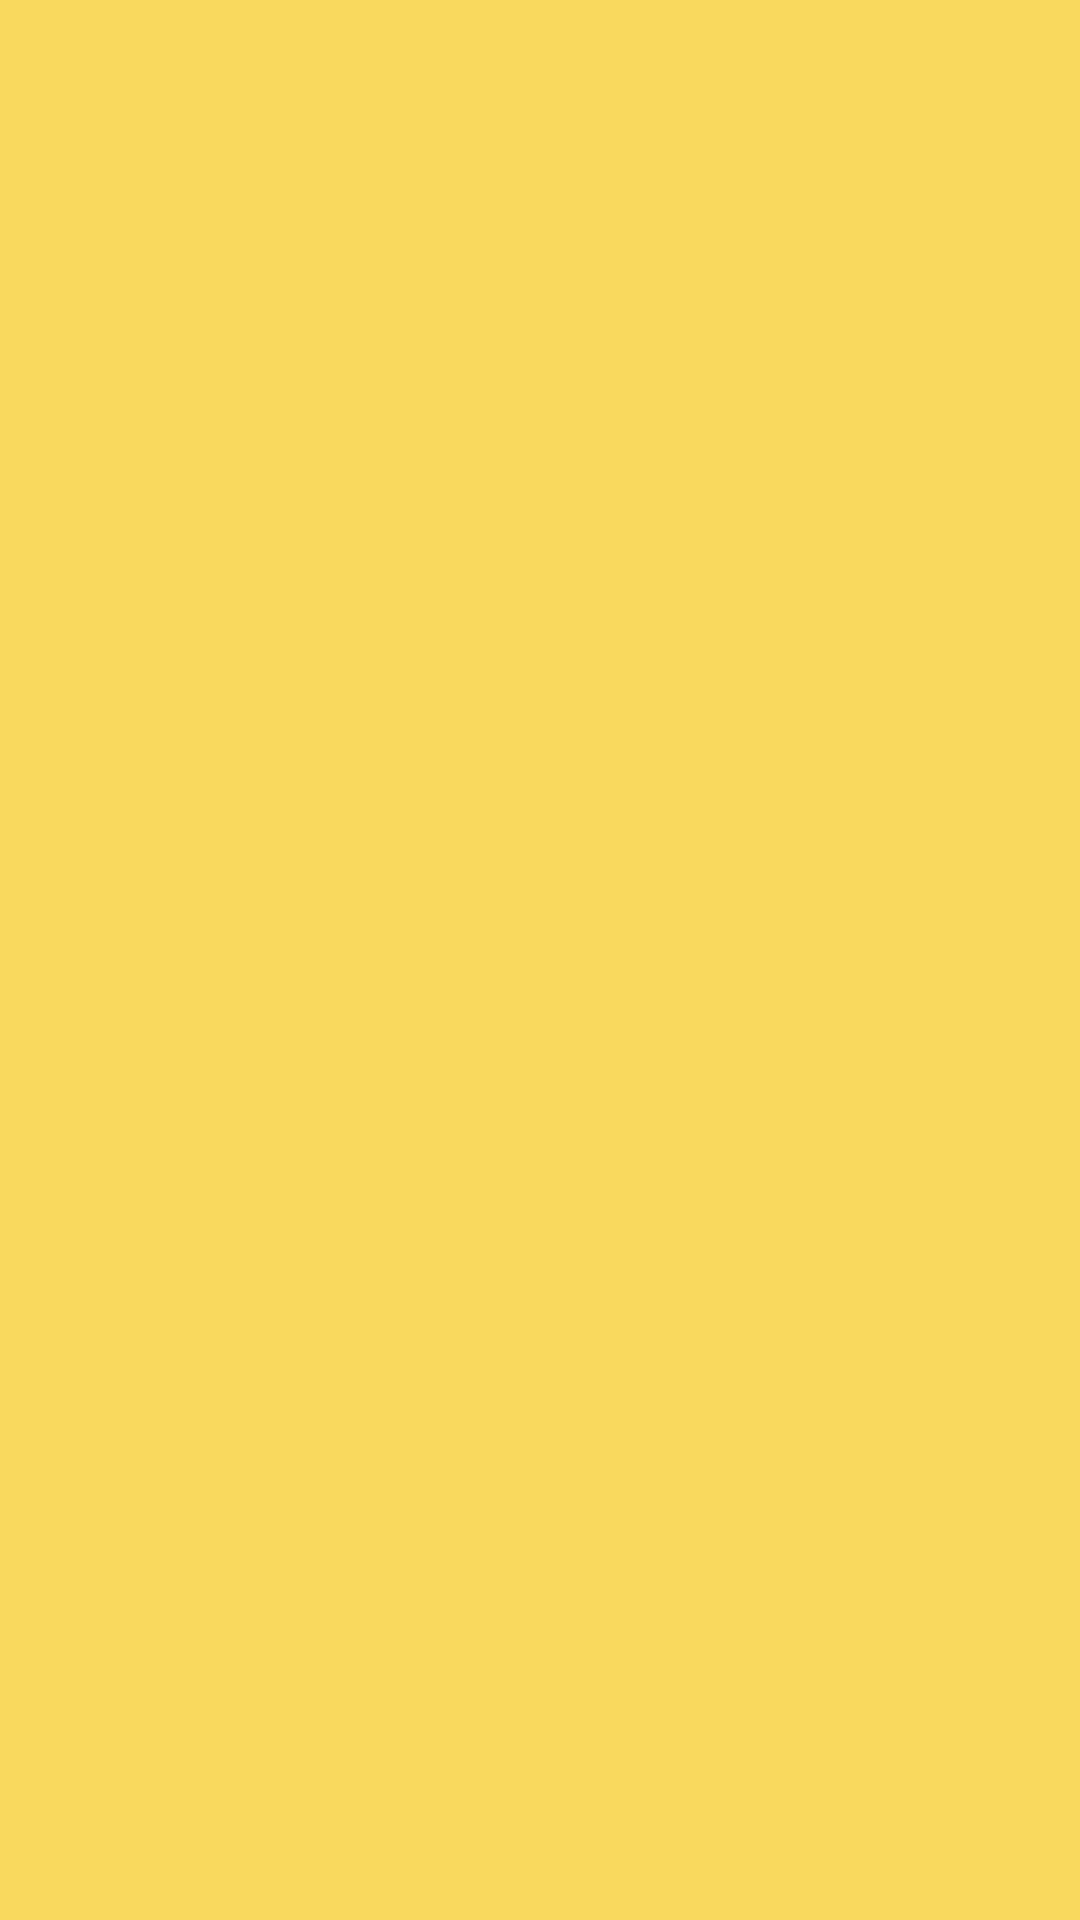 1080x1920 Royal Yellow Solid Color Background